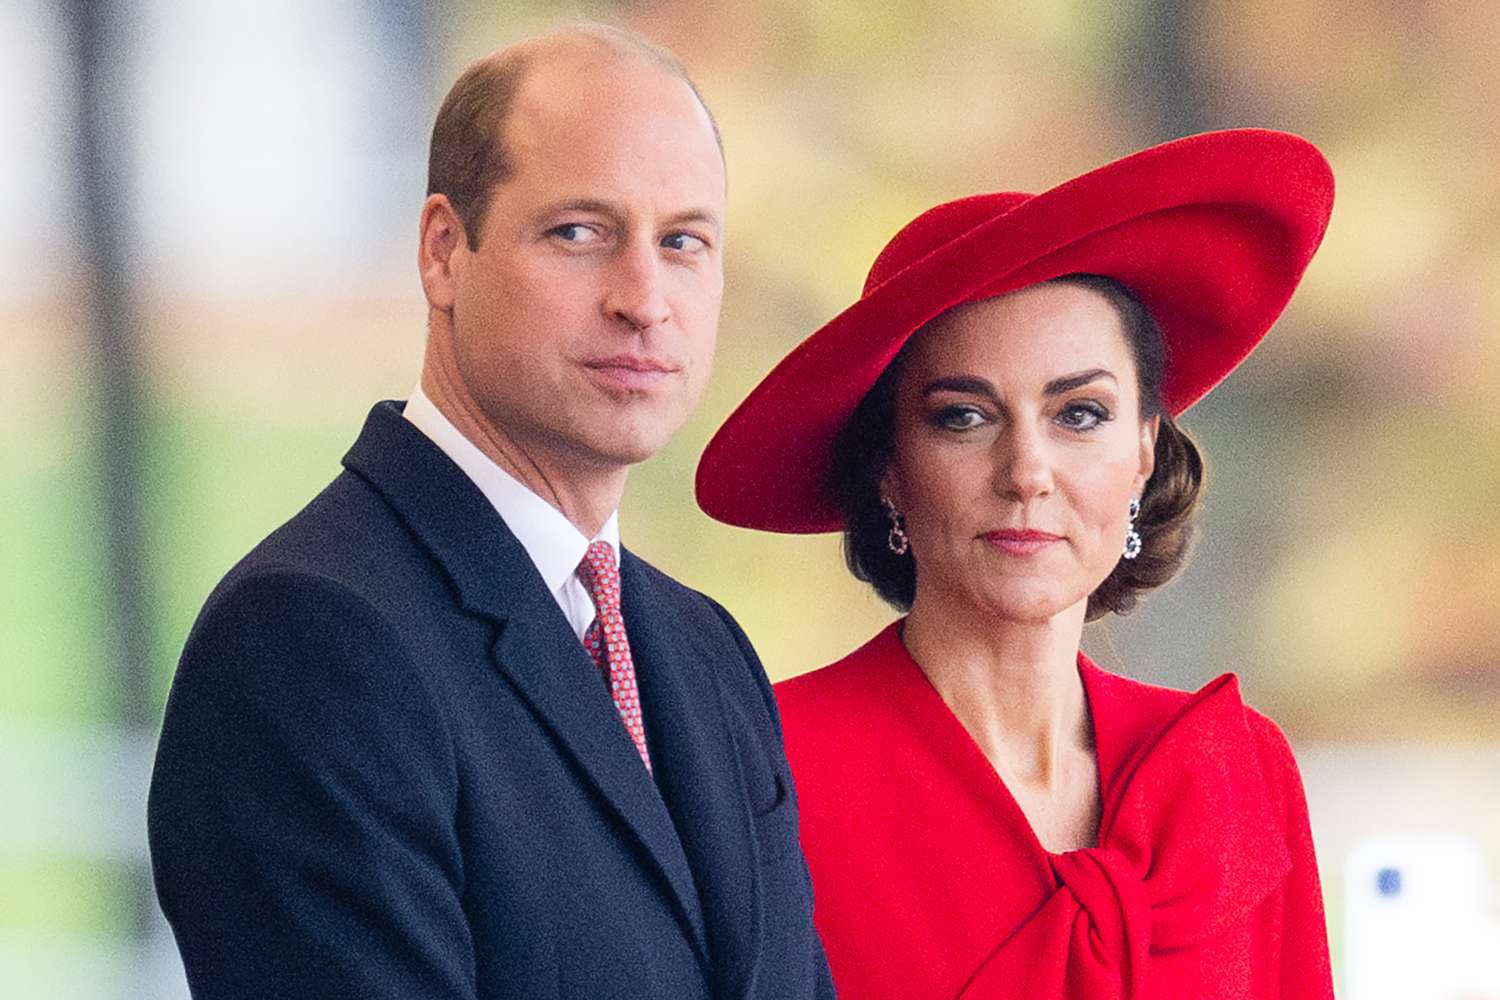 Prince William Receives Gifts for Kate Middleton amid Cancer Treatment, Including One Their Kids Will Love (Exclusive)